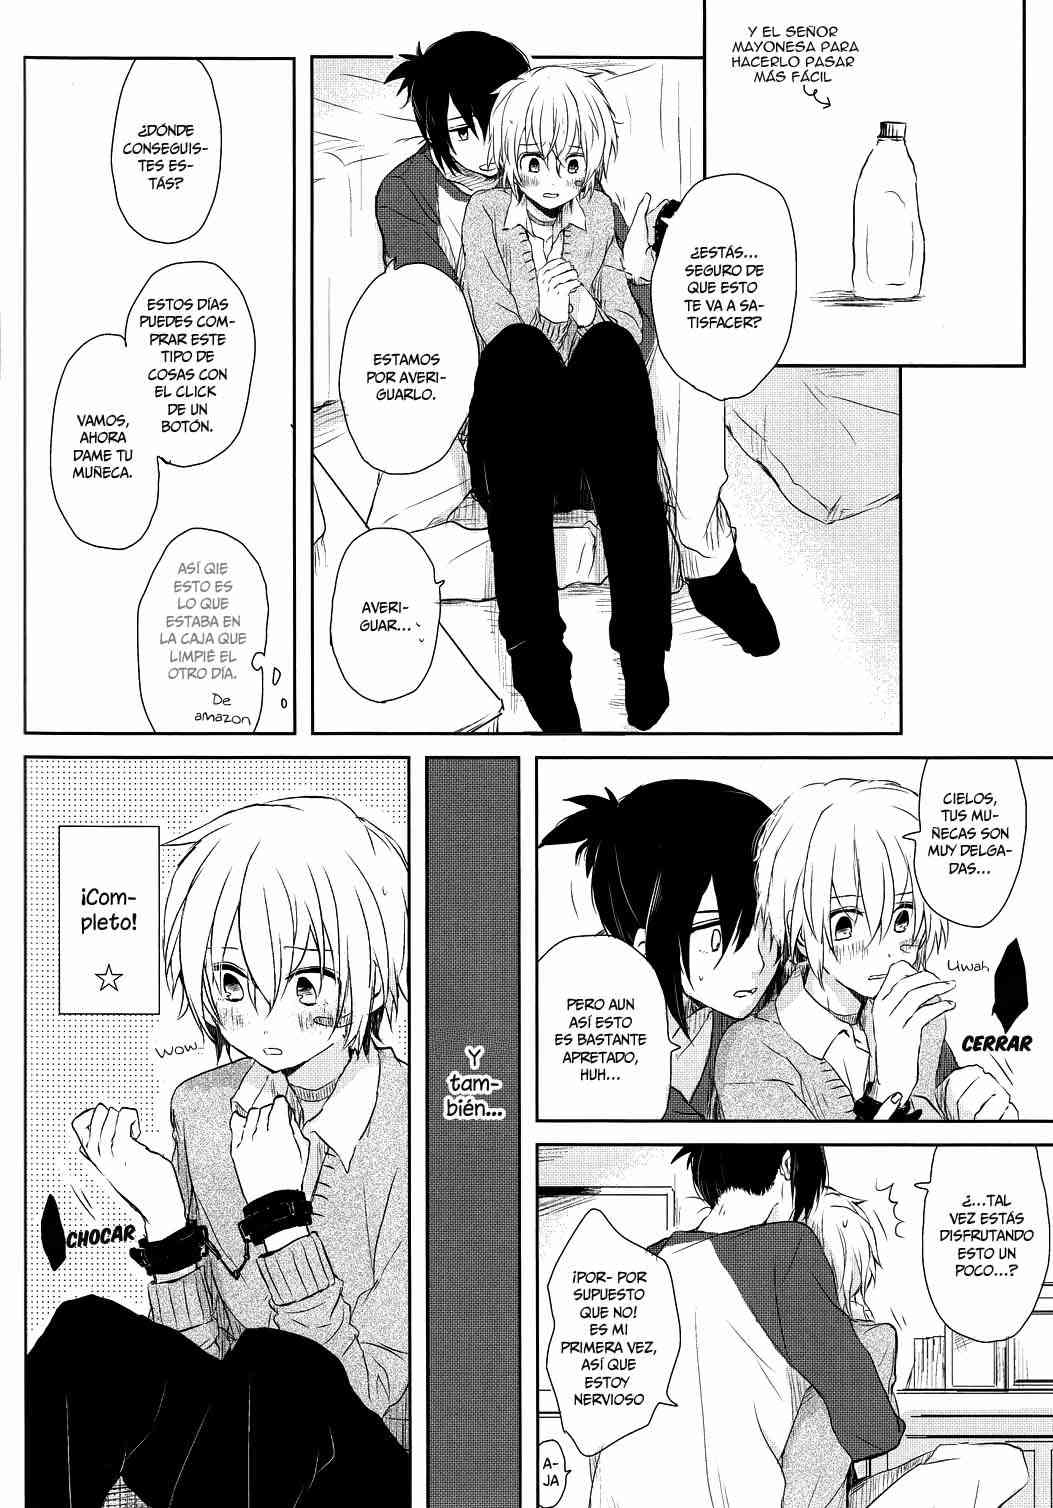 Doujinshi No.6 Determine Your Desire, then Do It Chapter-1 - 23